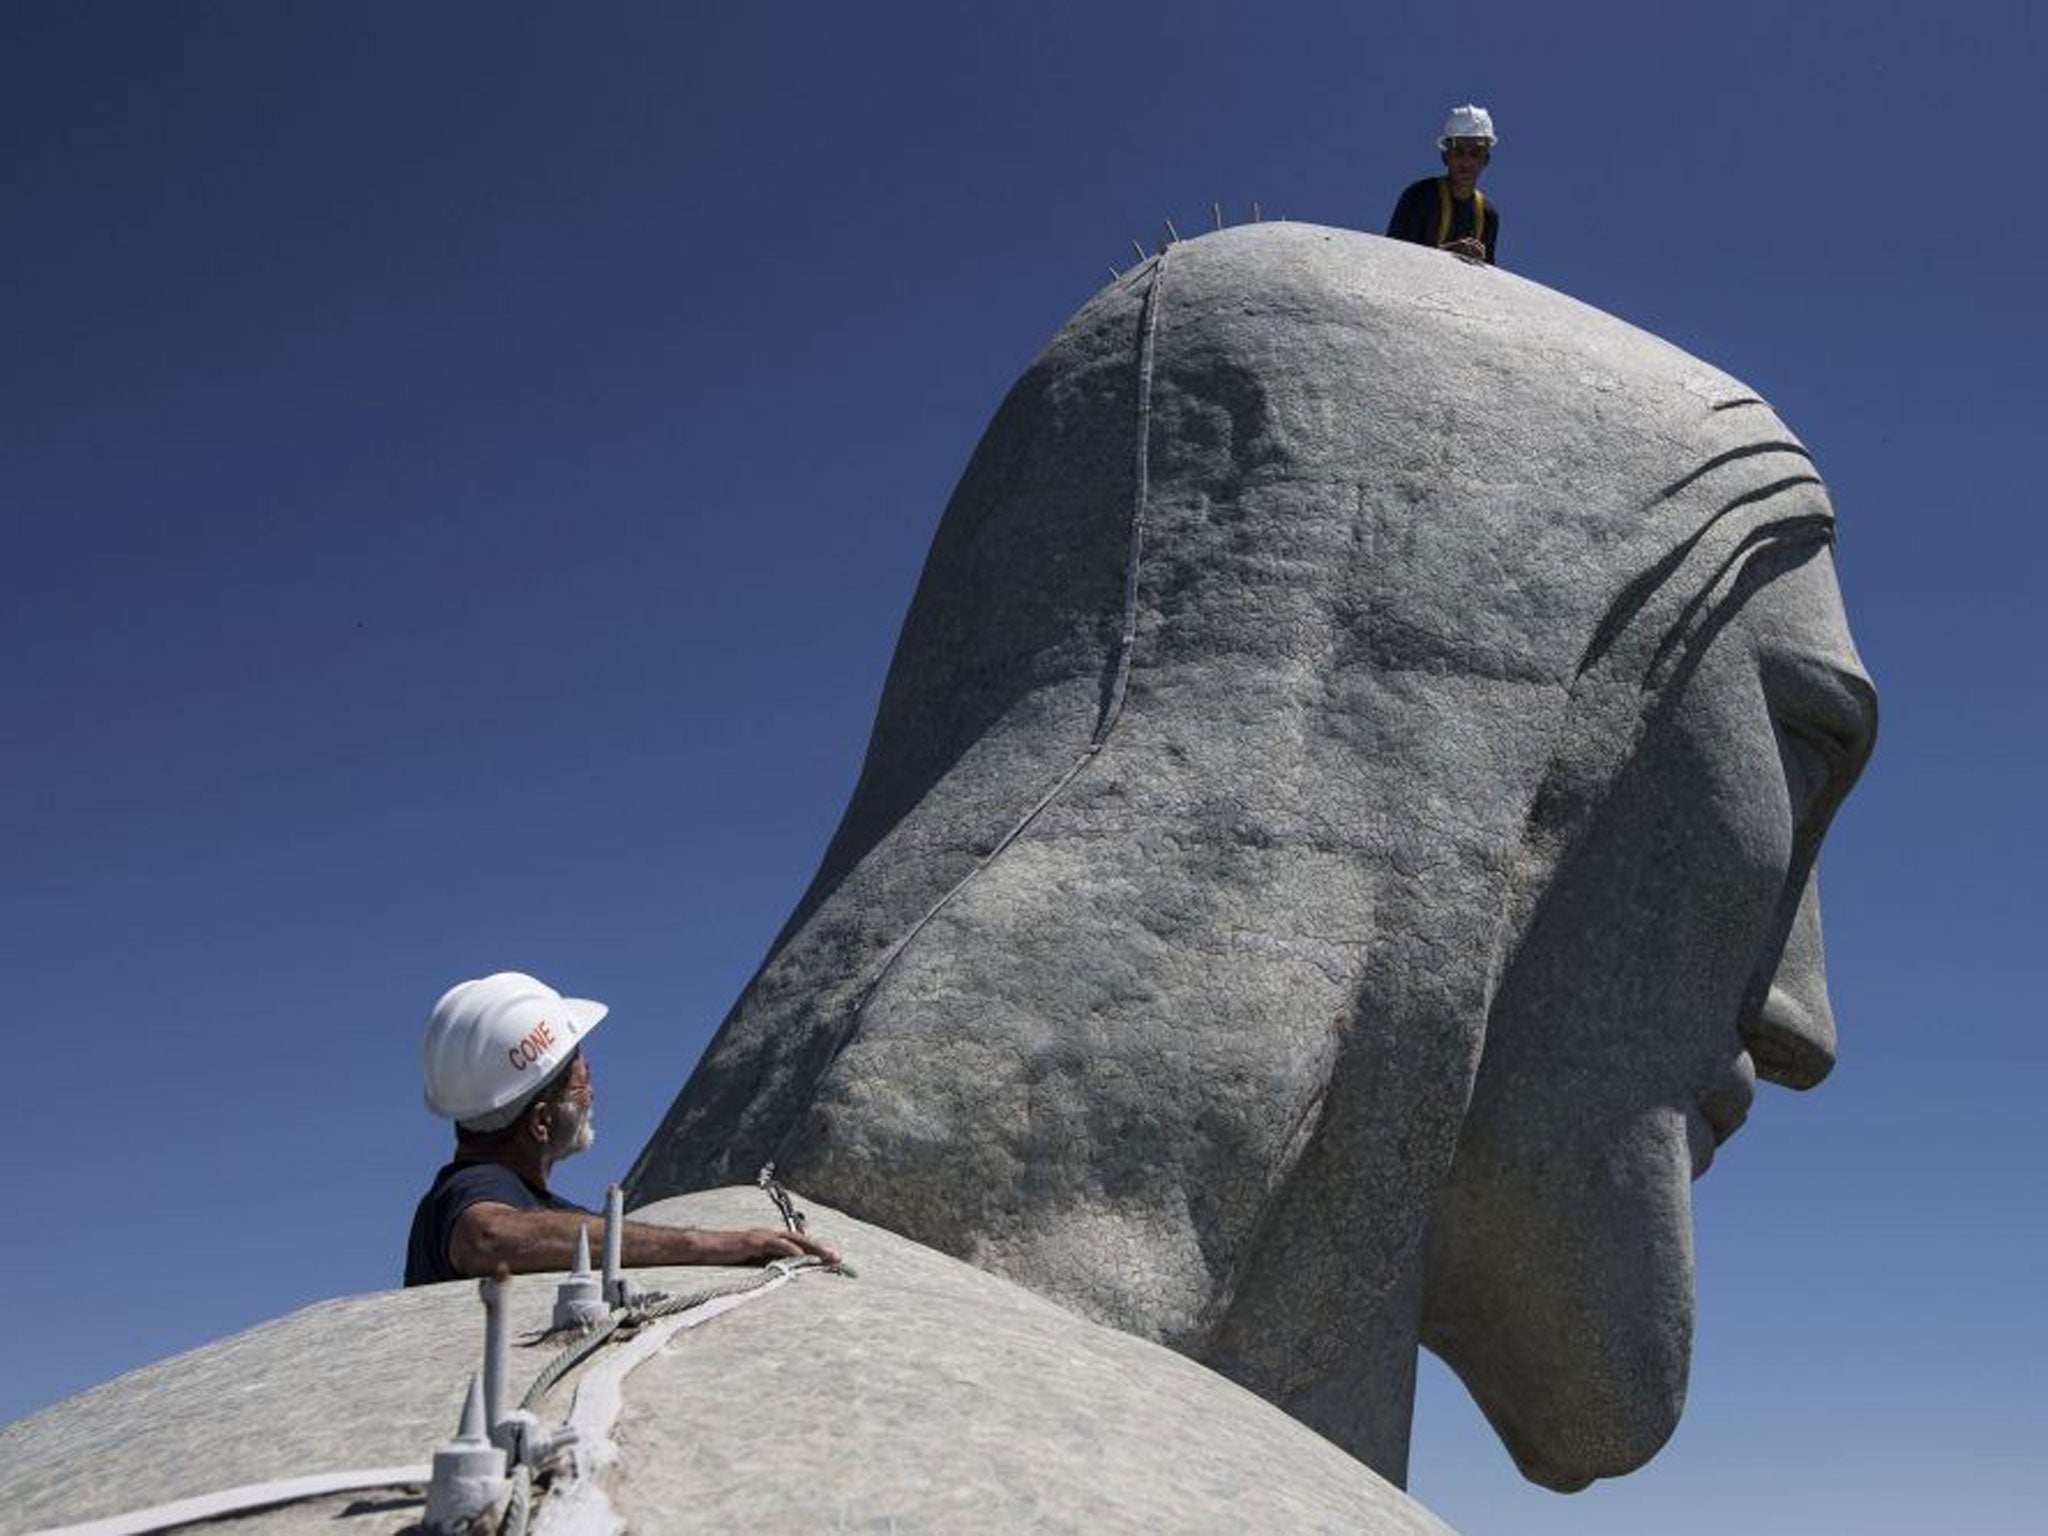 Repair workers examine the top of the Christ Redeemer statue in Rio de Janeiro